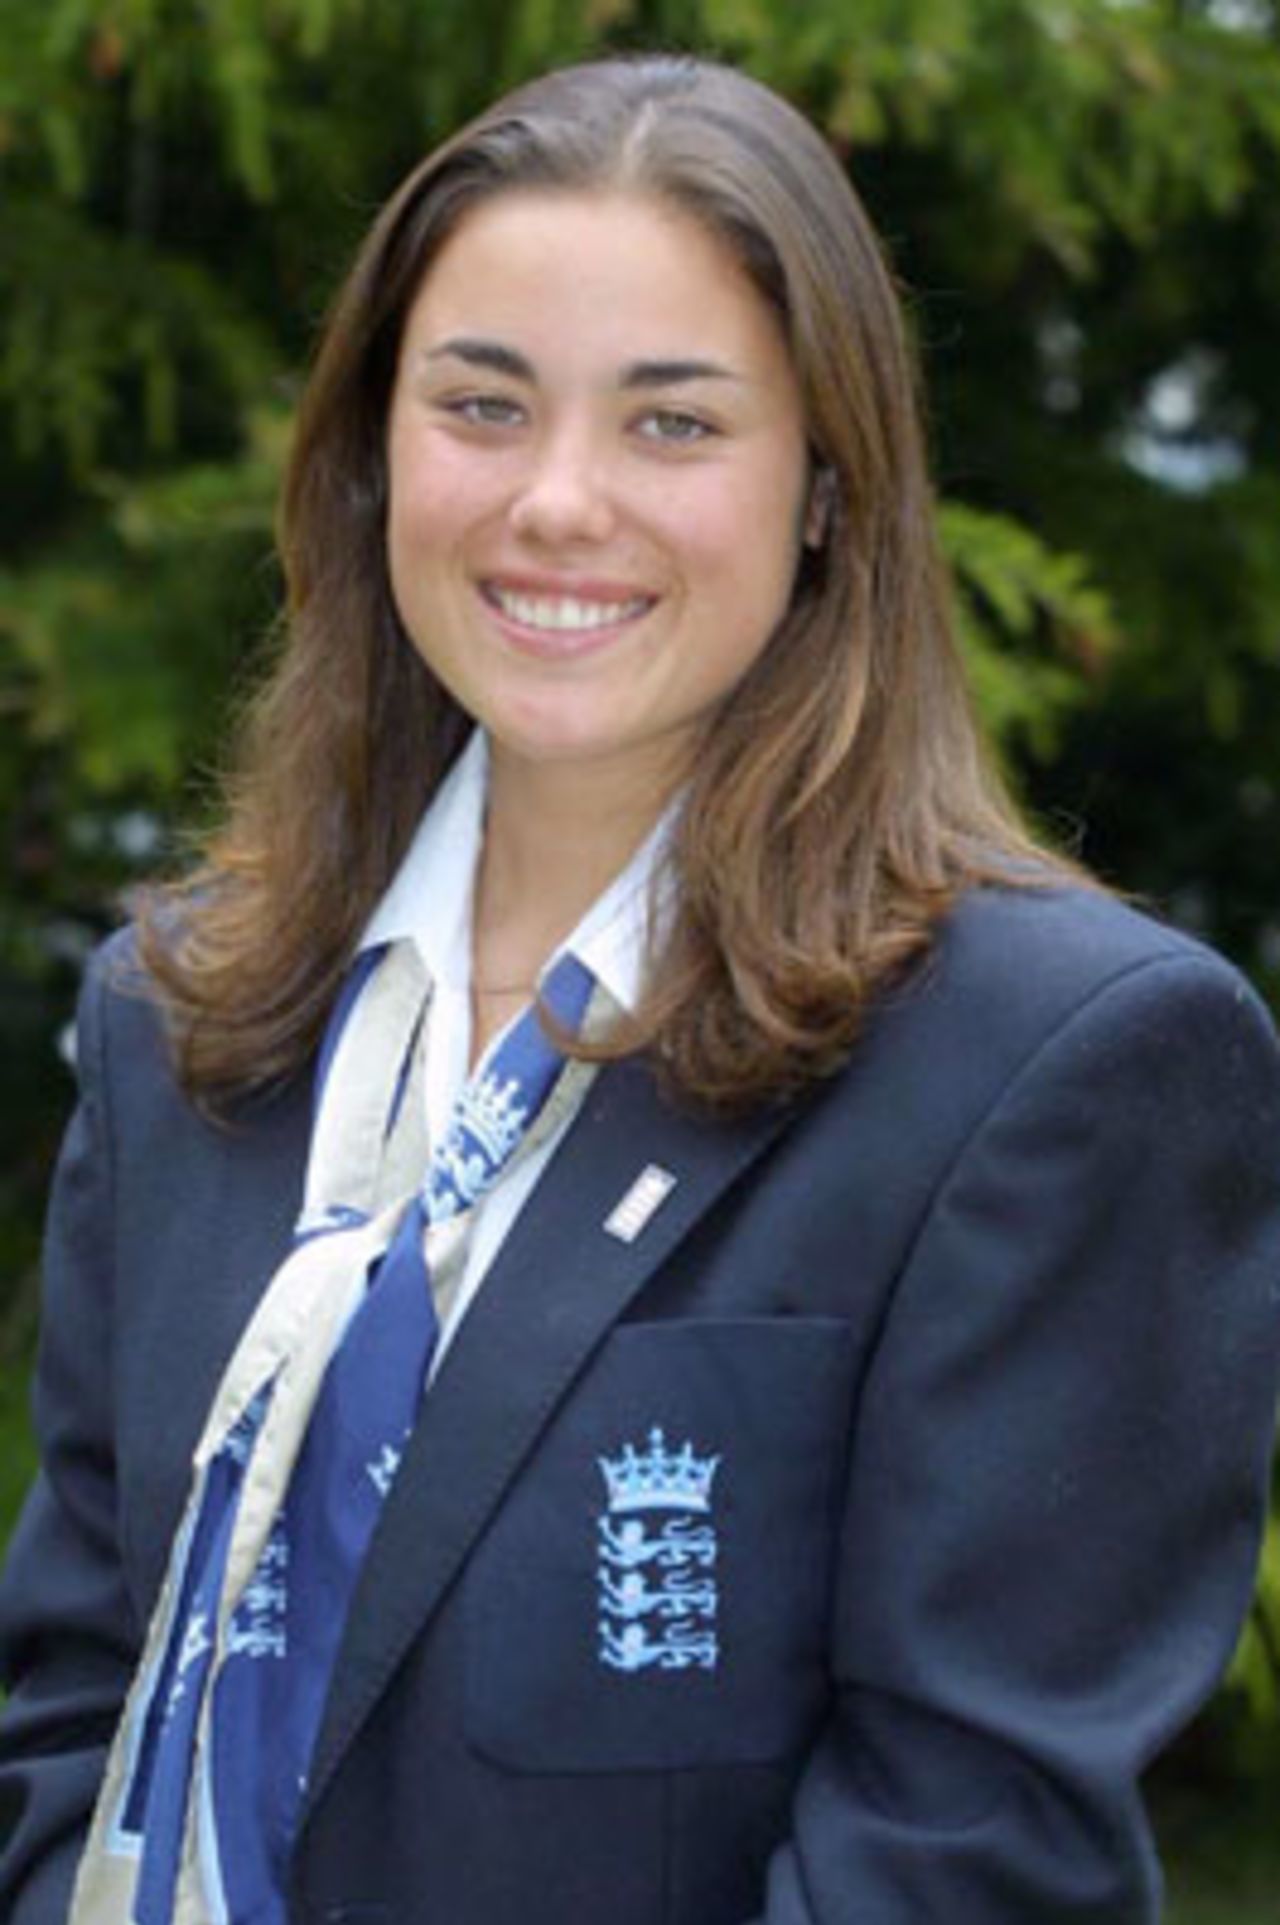 Portrait of Sarah Collyer - England player in the CricInfo Women's World Cup 2000